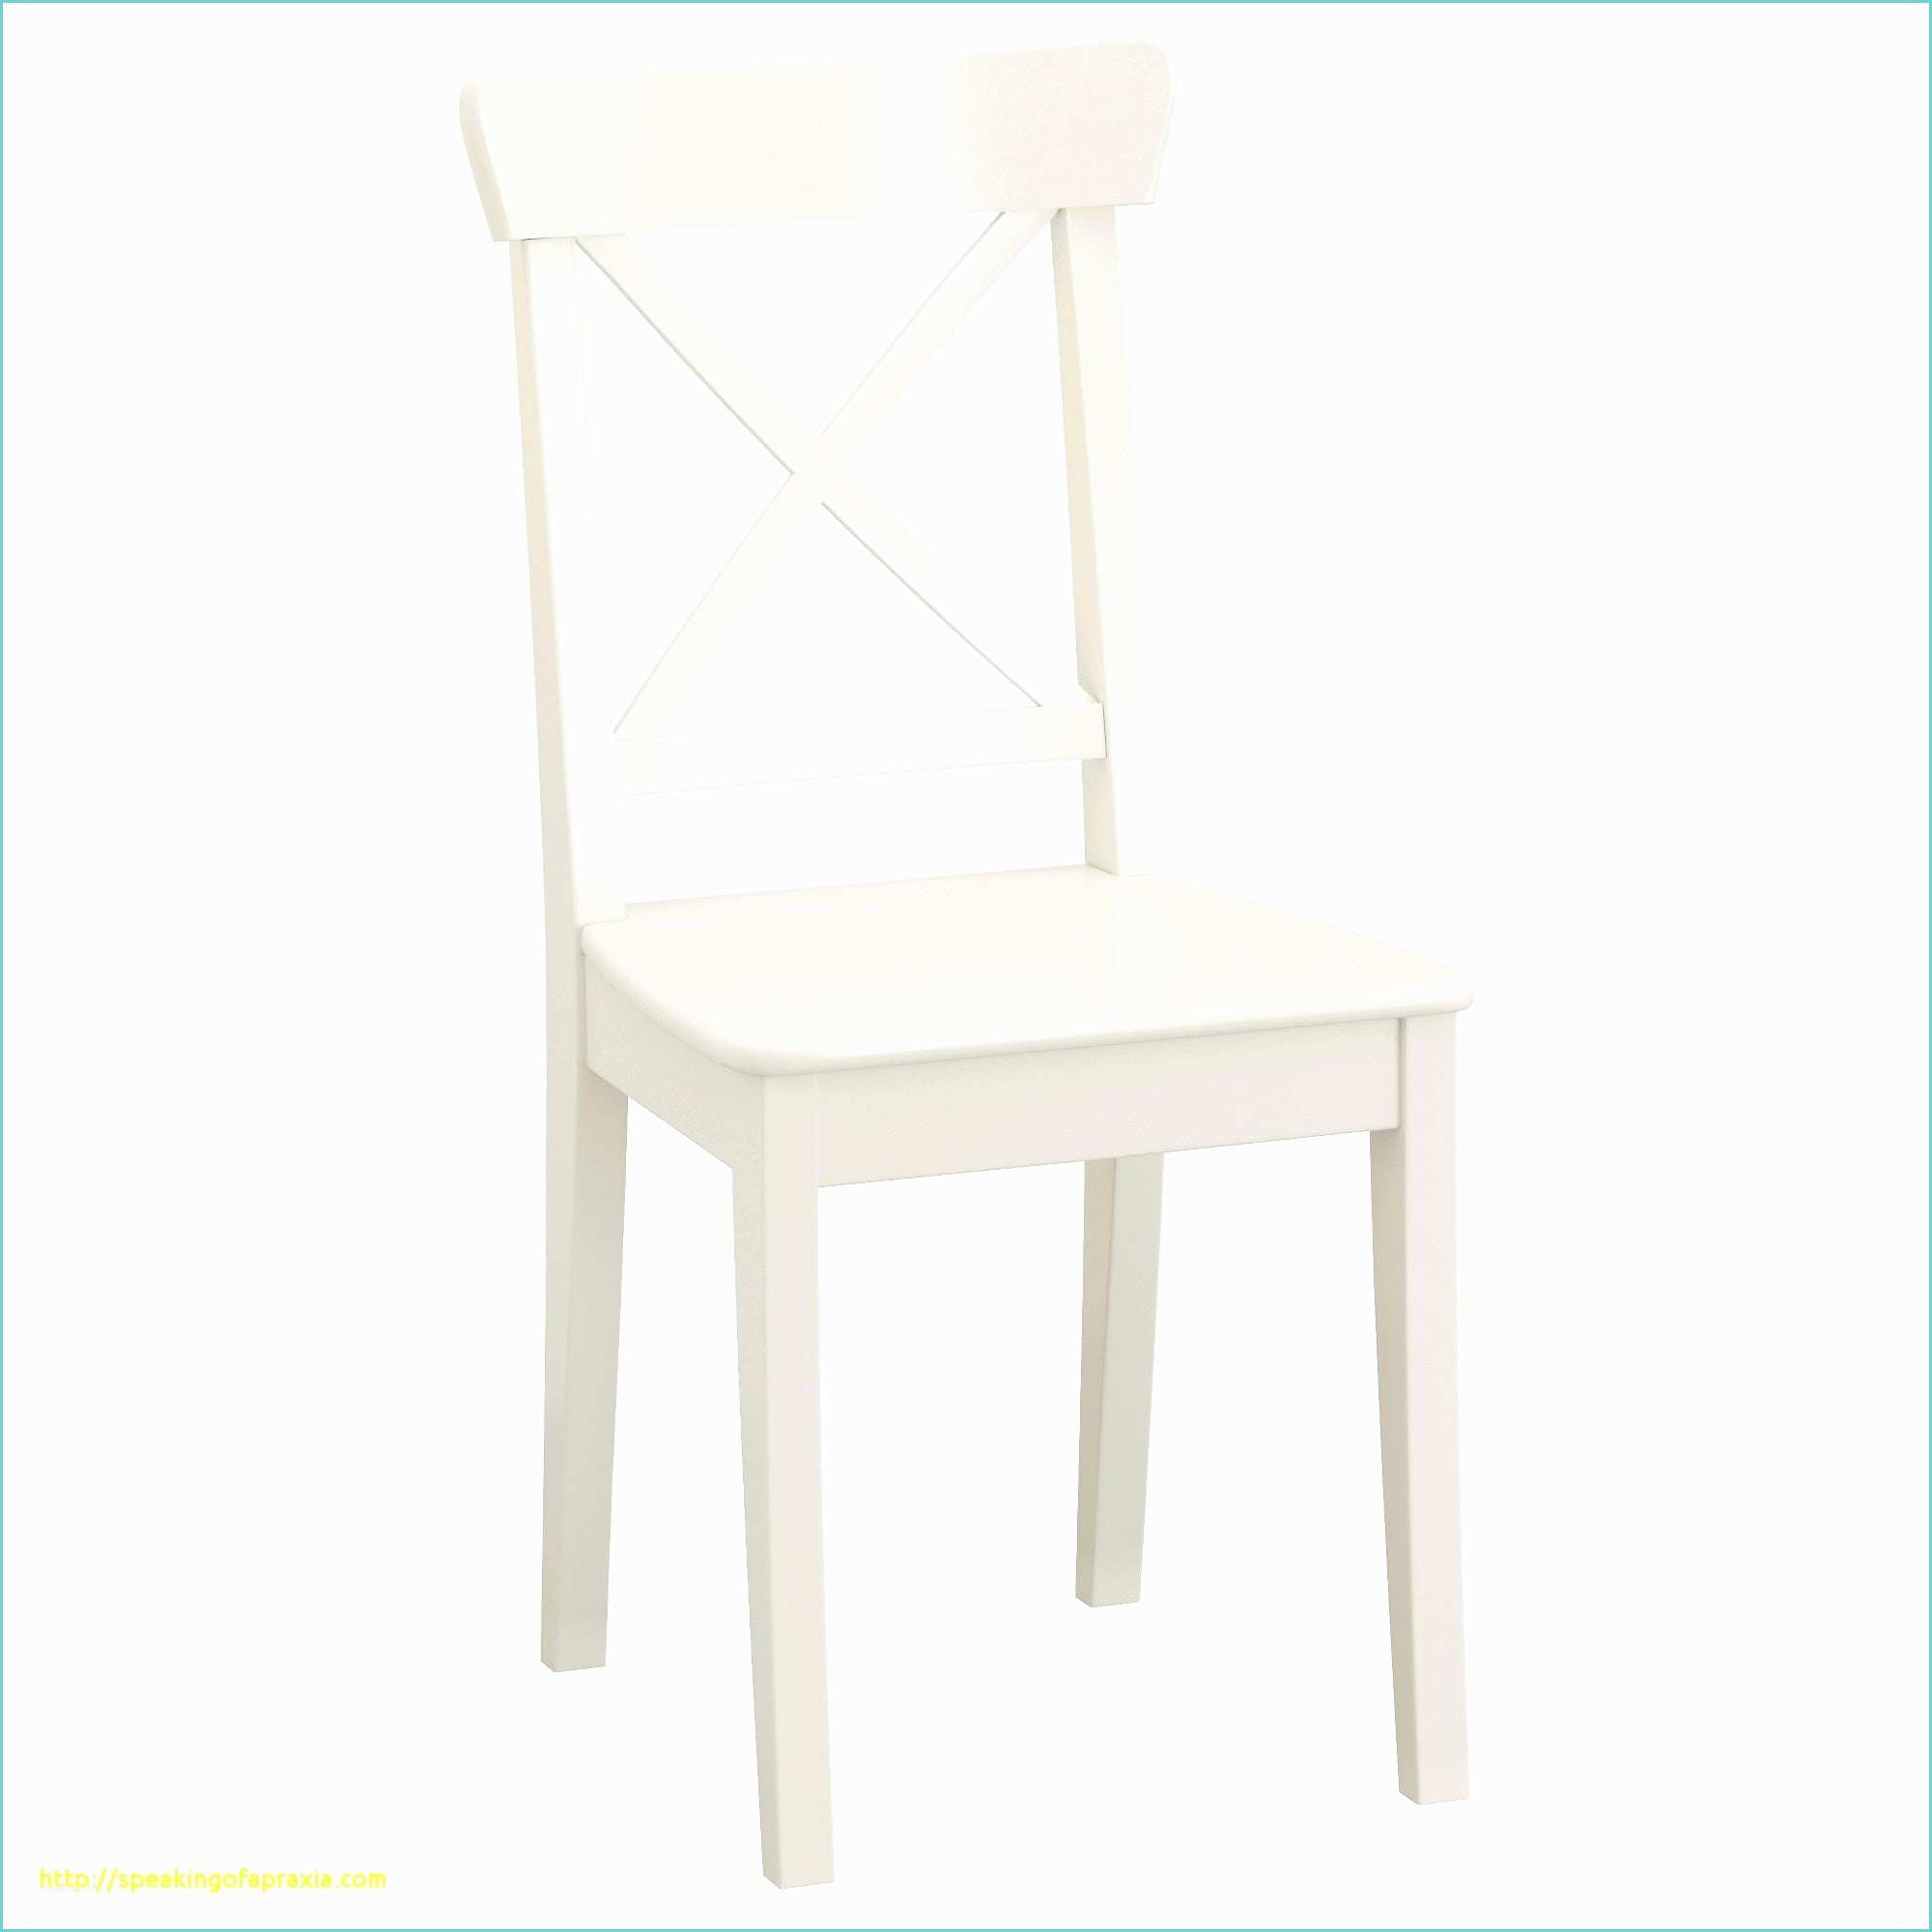 Chaise Ikea Blanche Chaise Bistrot Bois Élégant Chaise Bistrot Blanche Beau